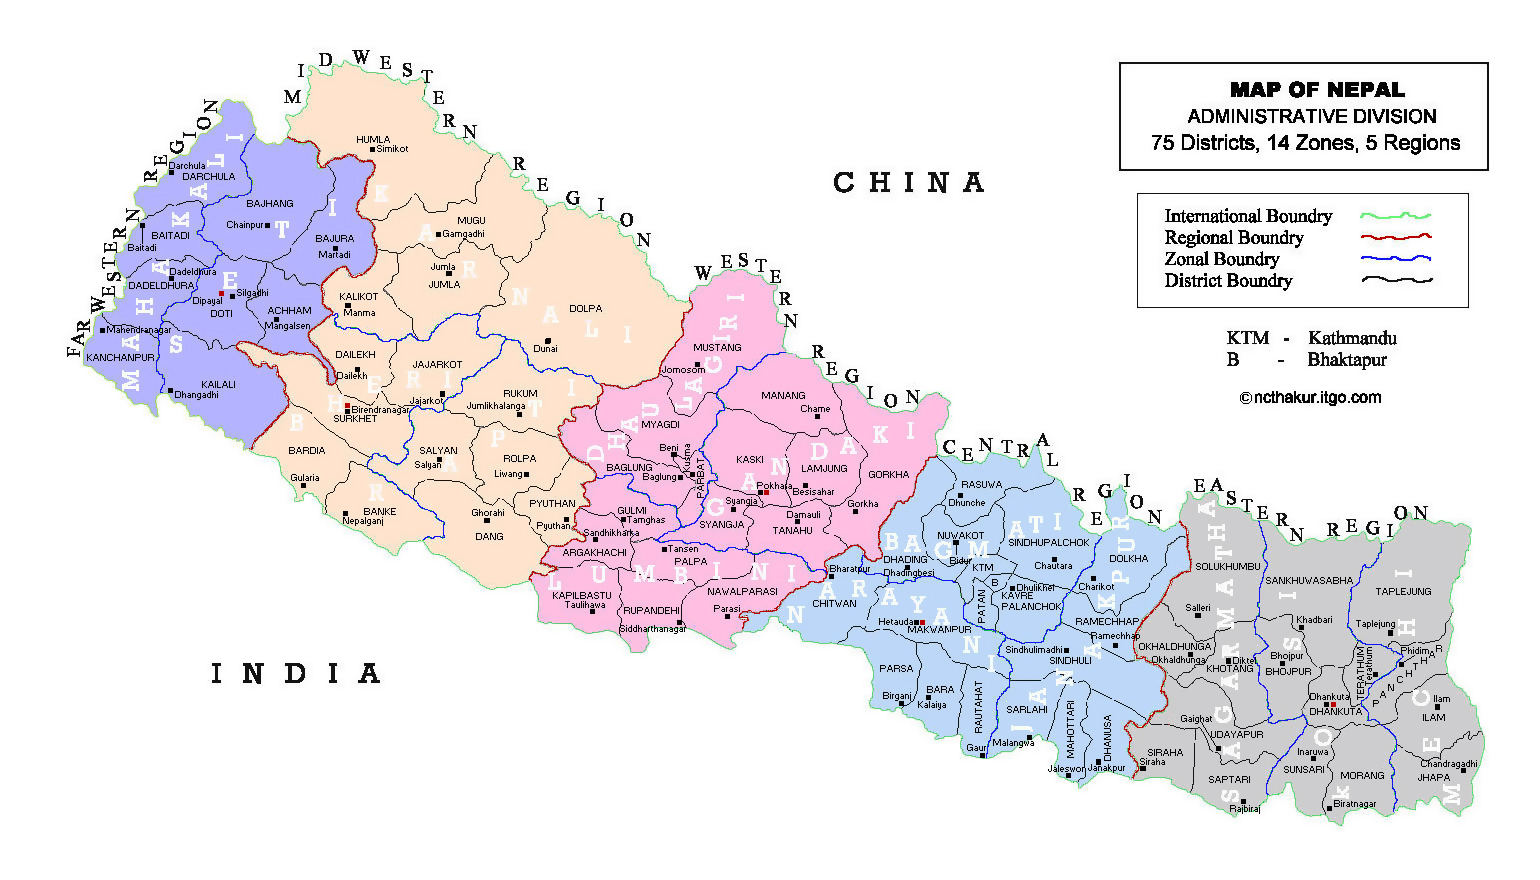 Nepal District Map With Province